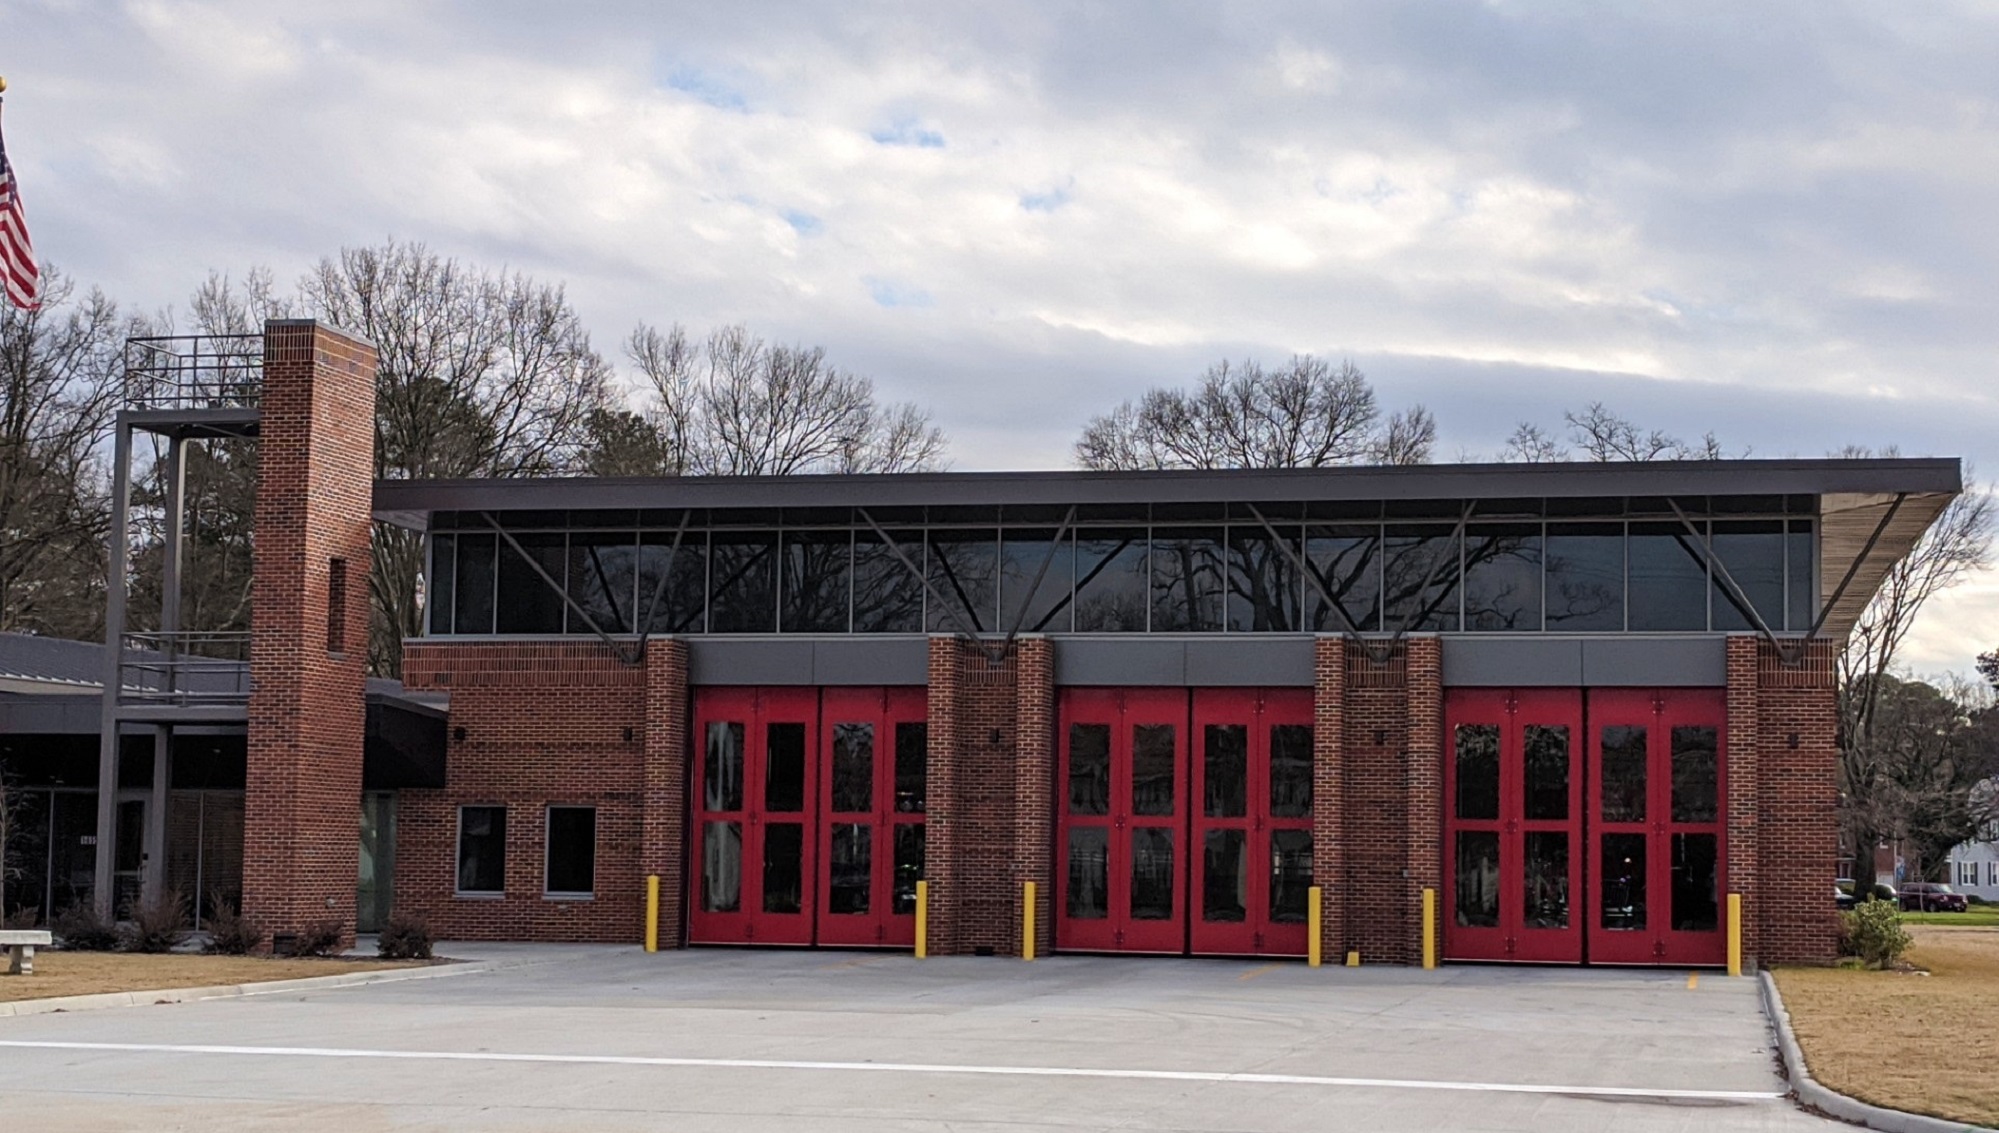 Why fire station Is No Friend To Small Business